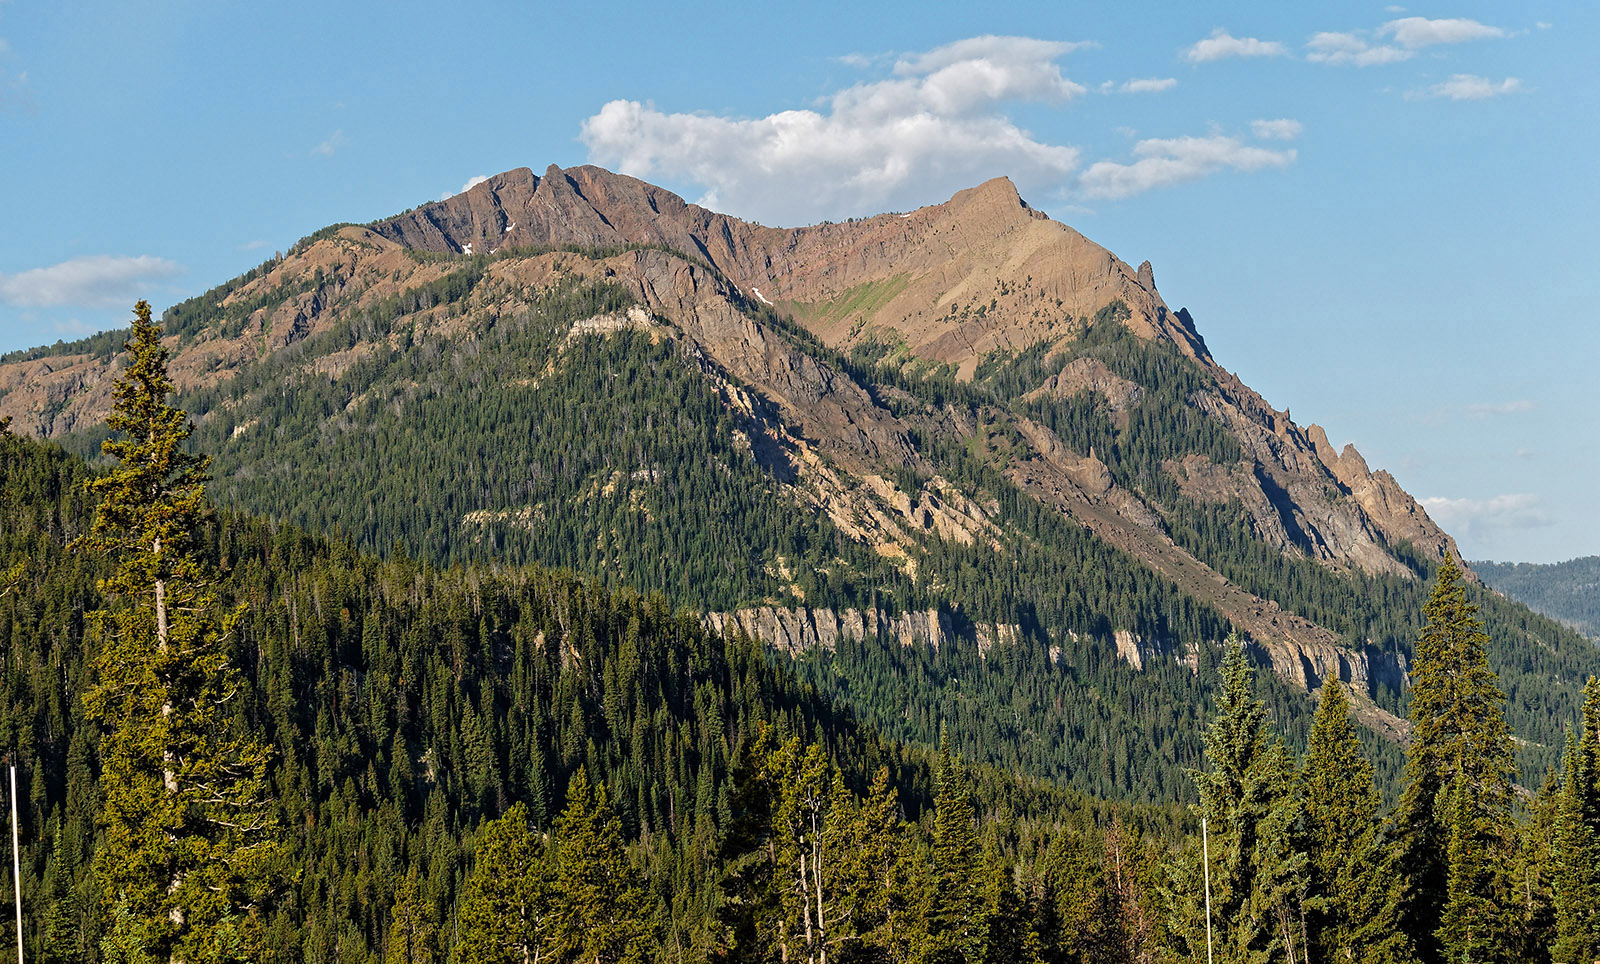 Republic Mountain above Cooke City, Montana with partially eroded Absaroka volcanic rock and conglomerate above Pilgrim limestone.  Gold was discovered in Cooke City in 1870 while the area was still part of the Crow reservation.  After relocating Crow to exploit mineral deposits of gold, silver, copper and lead, extensive mining occurred between the late 1800's and 1930.